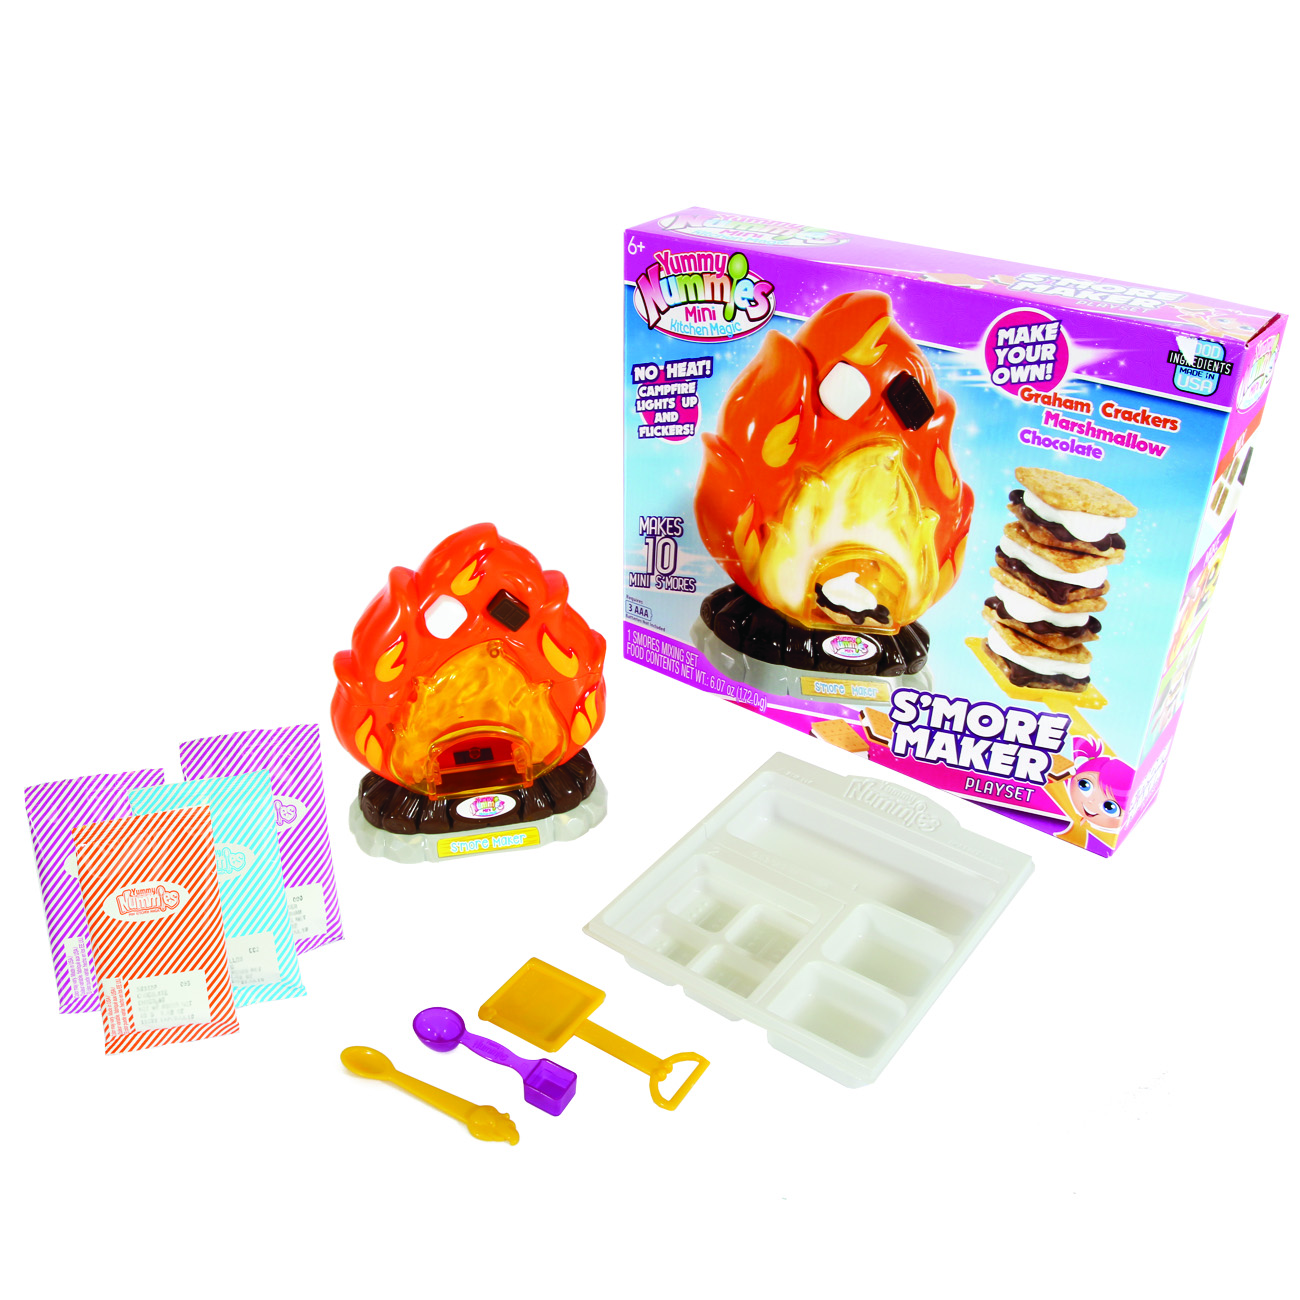 S'mores Maker Playset Contents